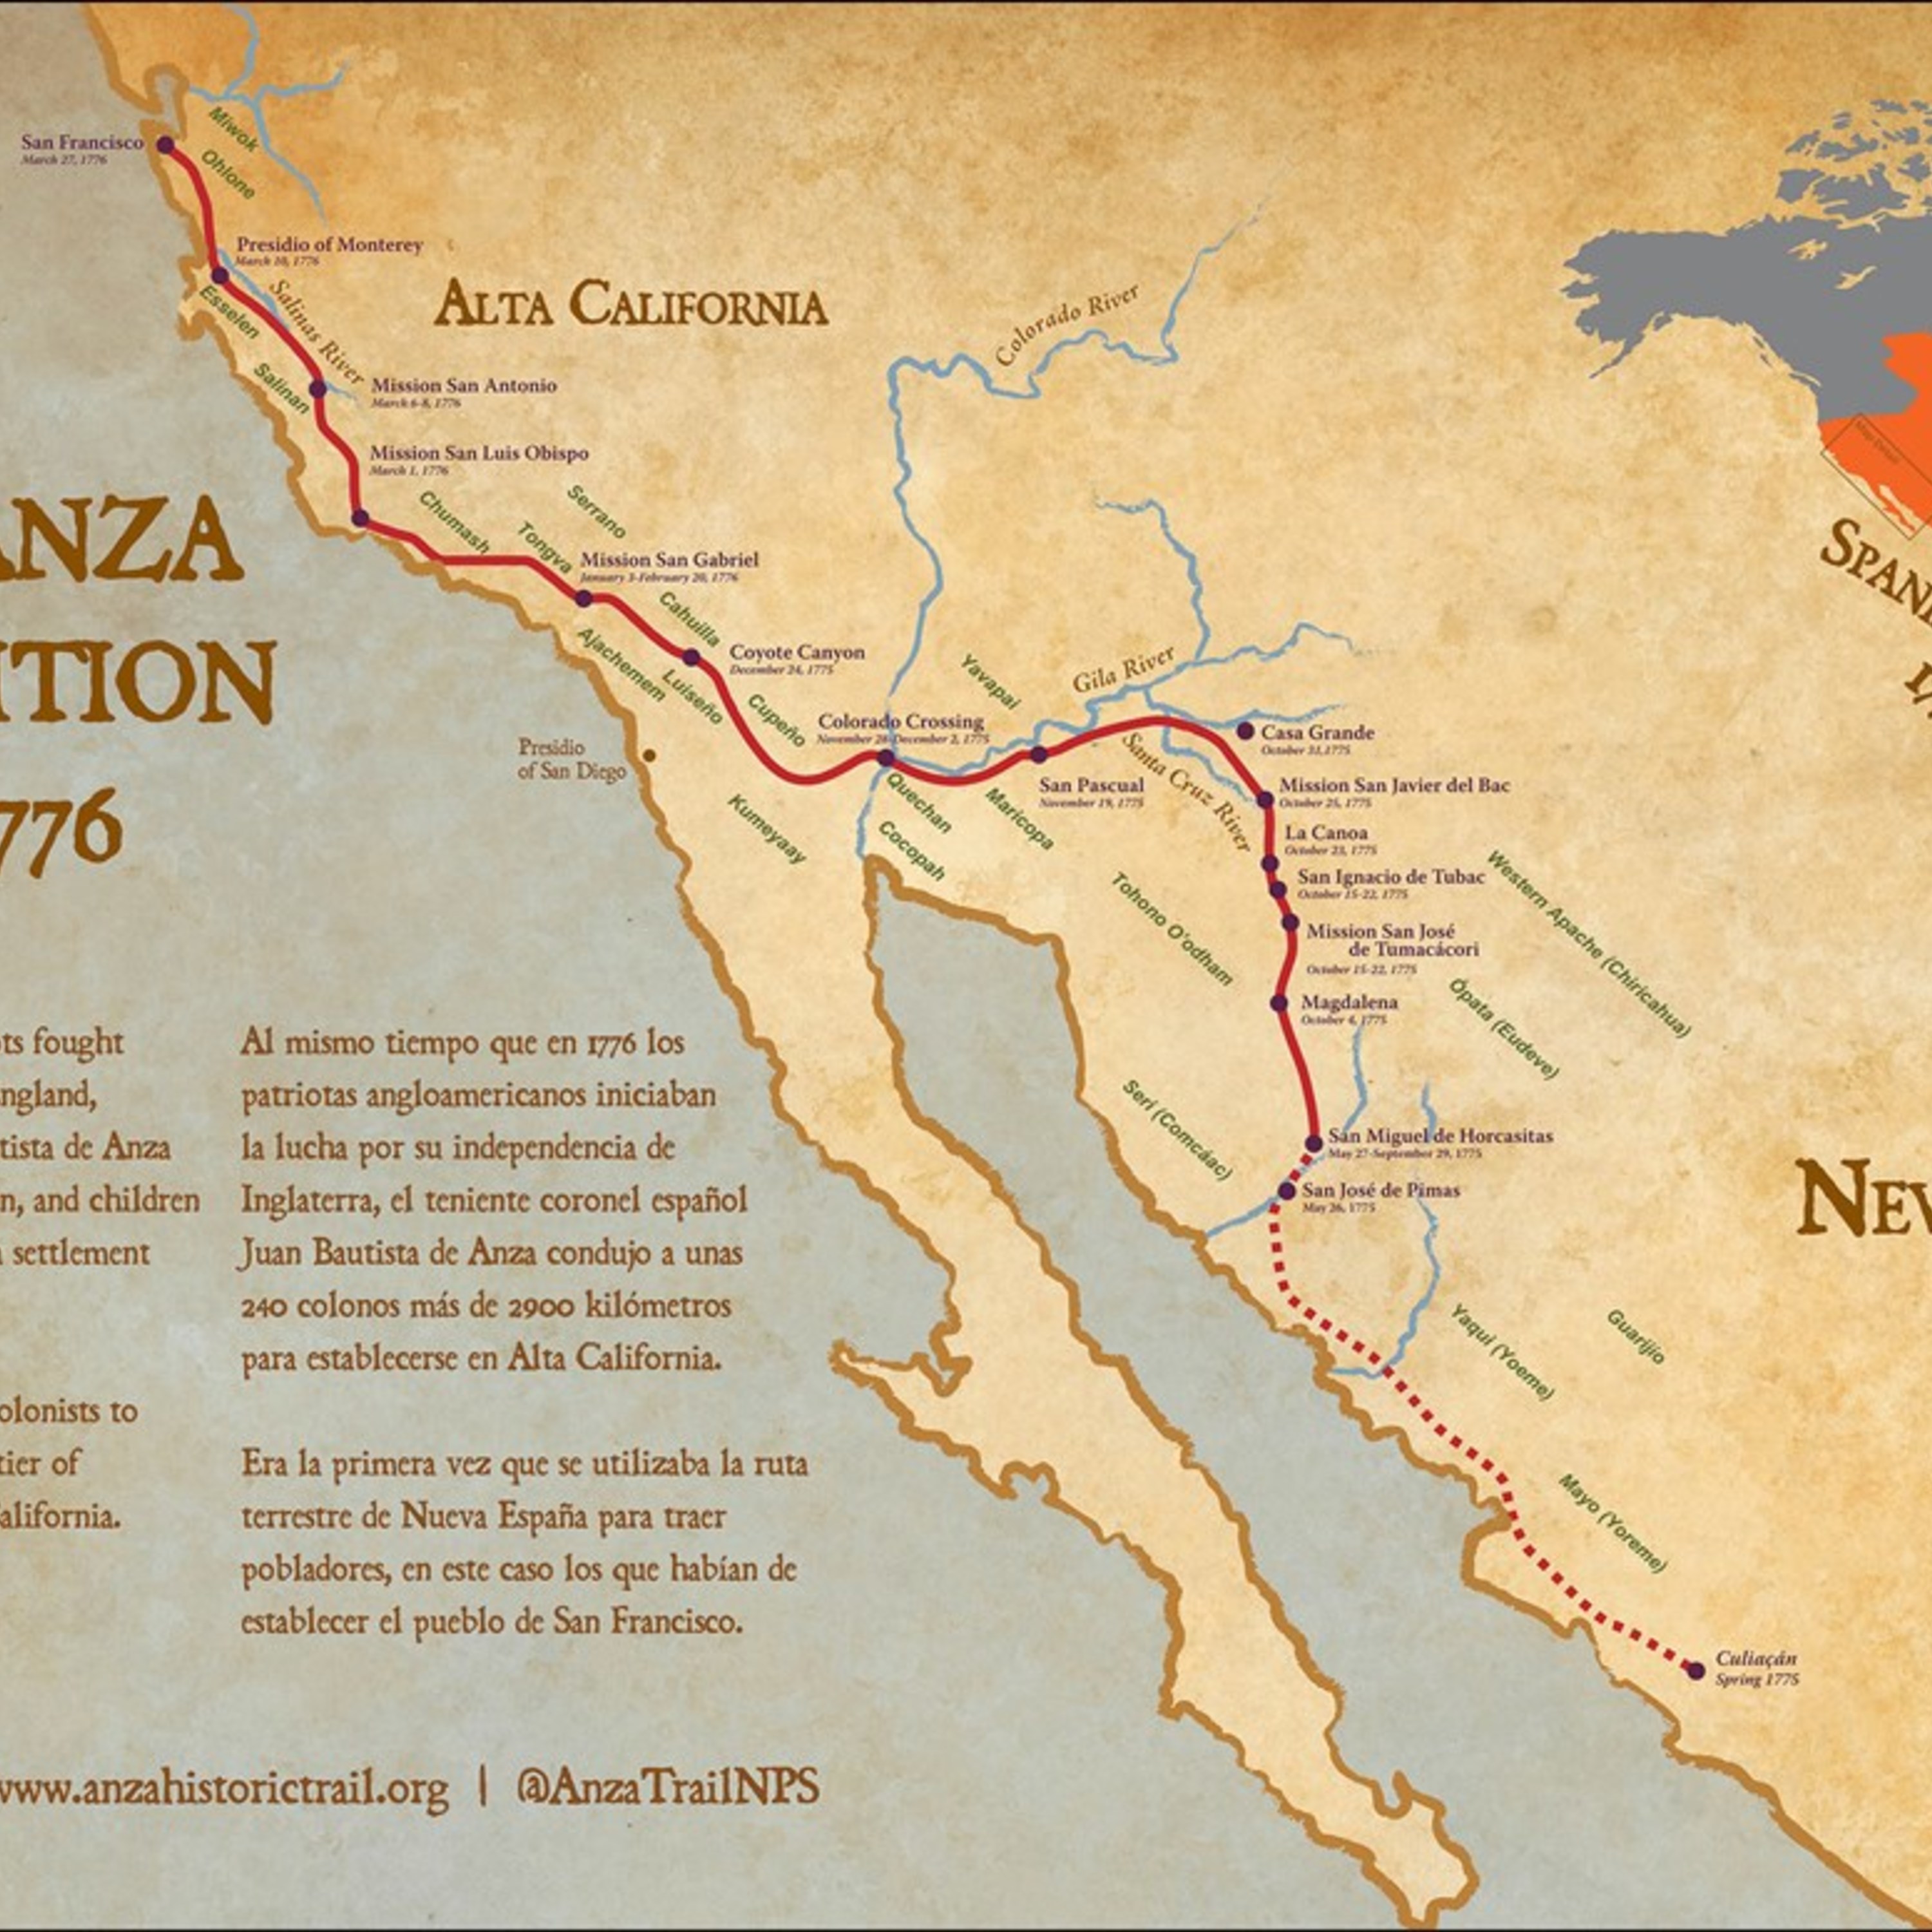 Anza-Expedition-Map-Banner.jpg